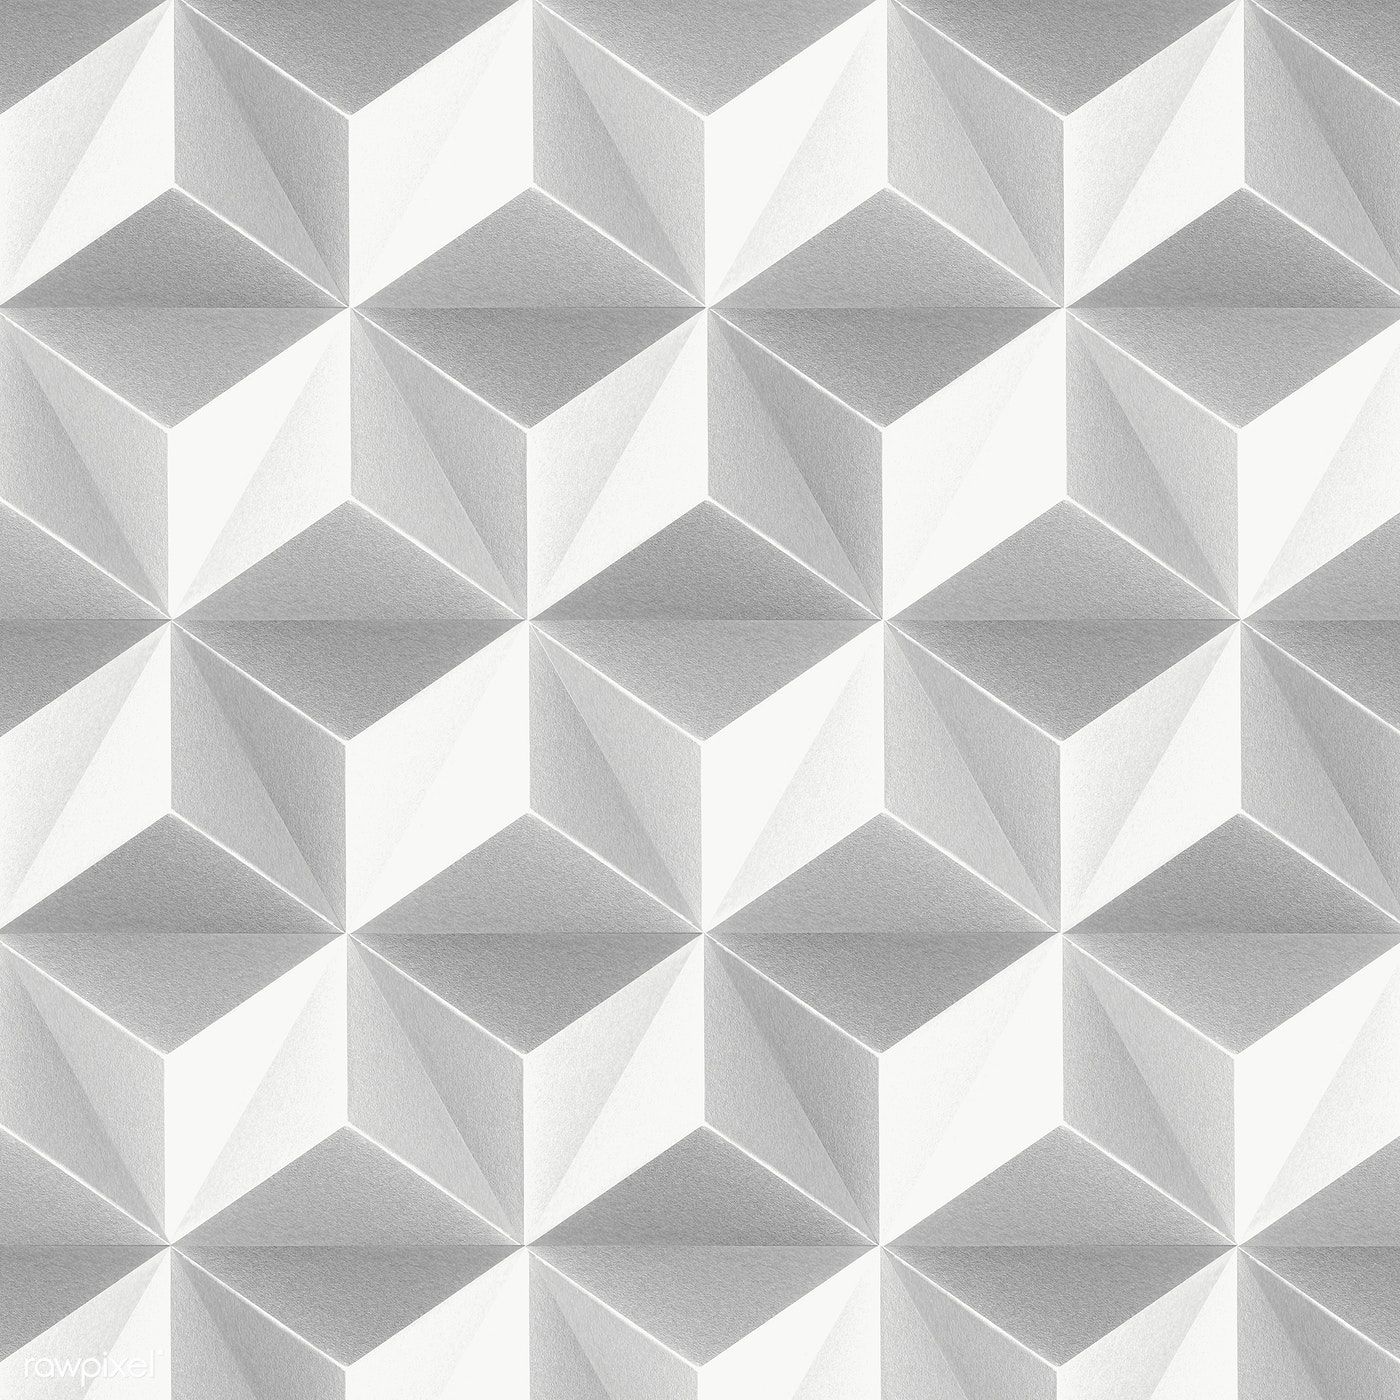 Cubic Seamless Patterned Background Design Element Image By